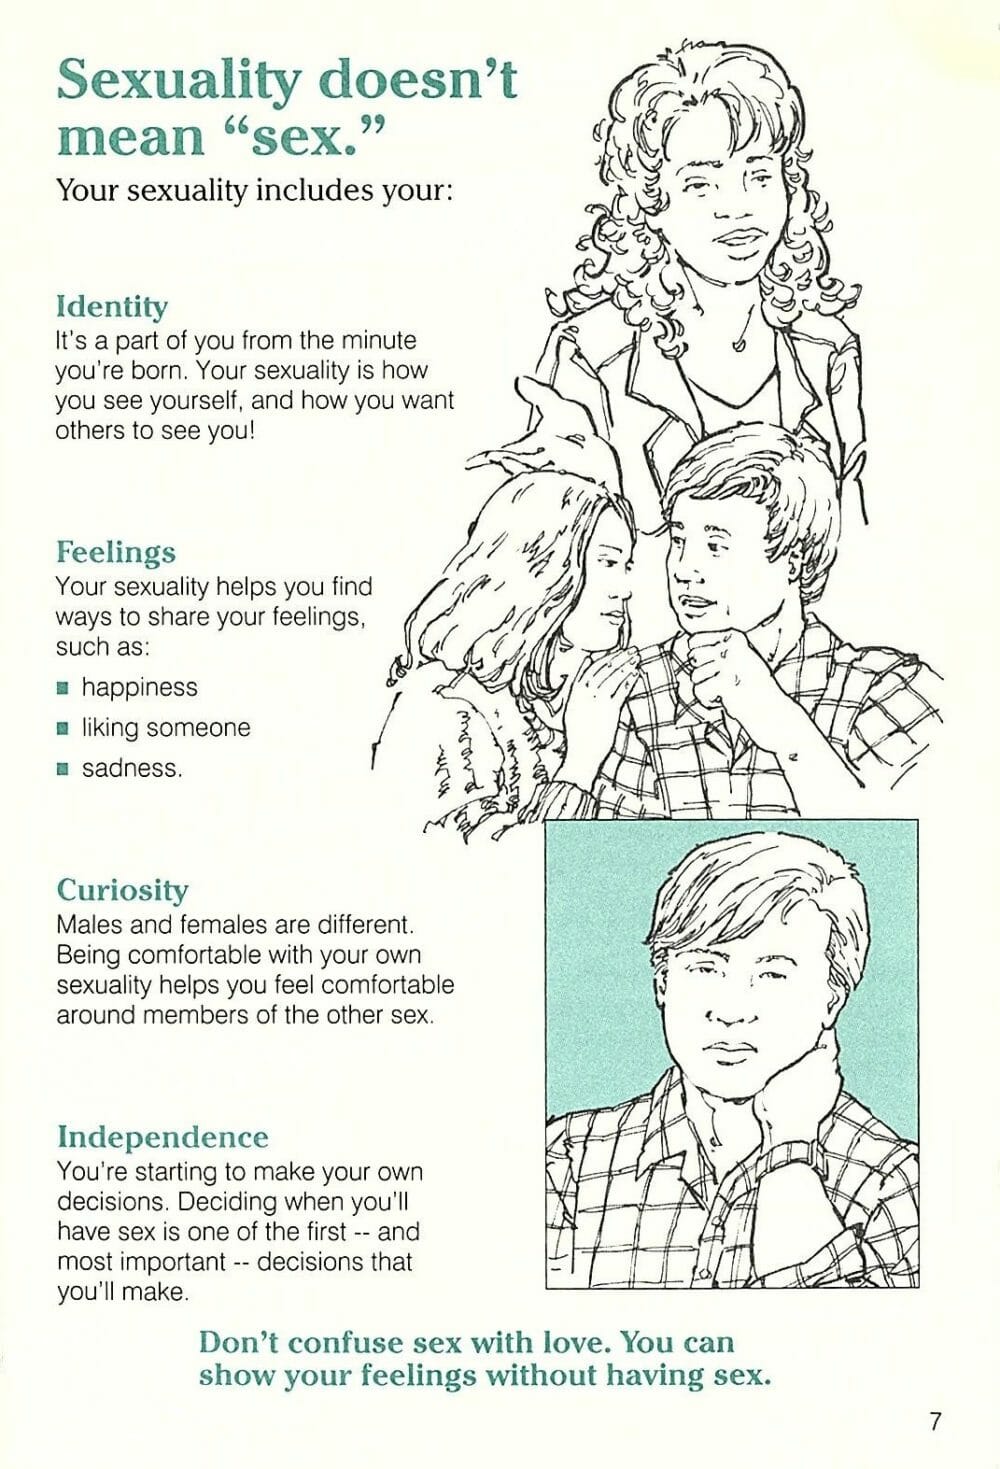 An illustrated brochure explains to teens: "Sexuality doesn't mean sex."